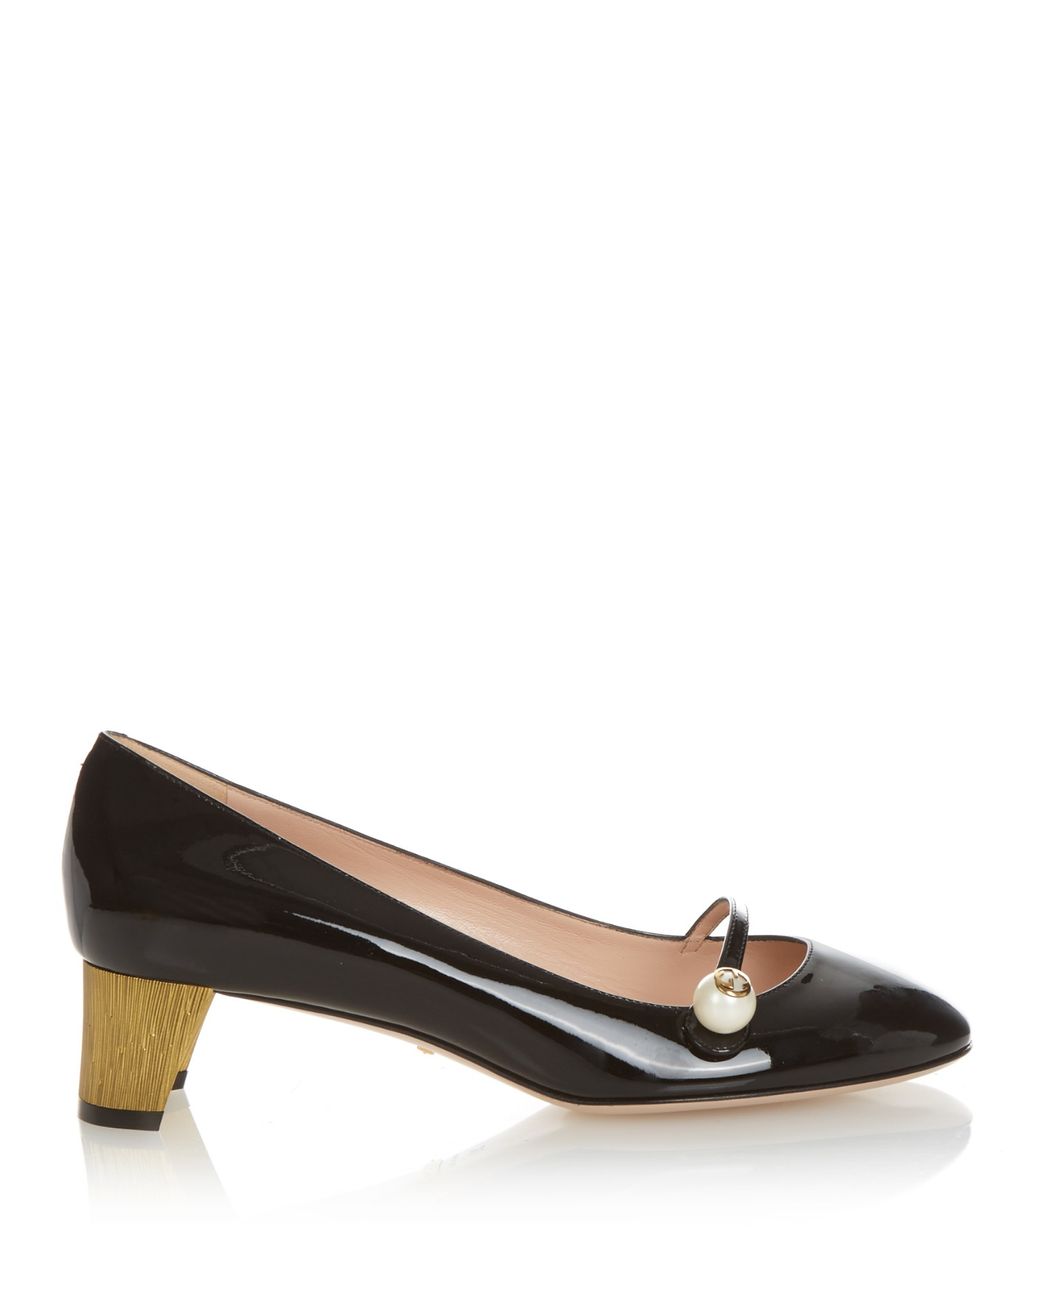 Gucci Arielle Patent-leather Pumps in Black | Lyst